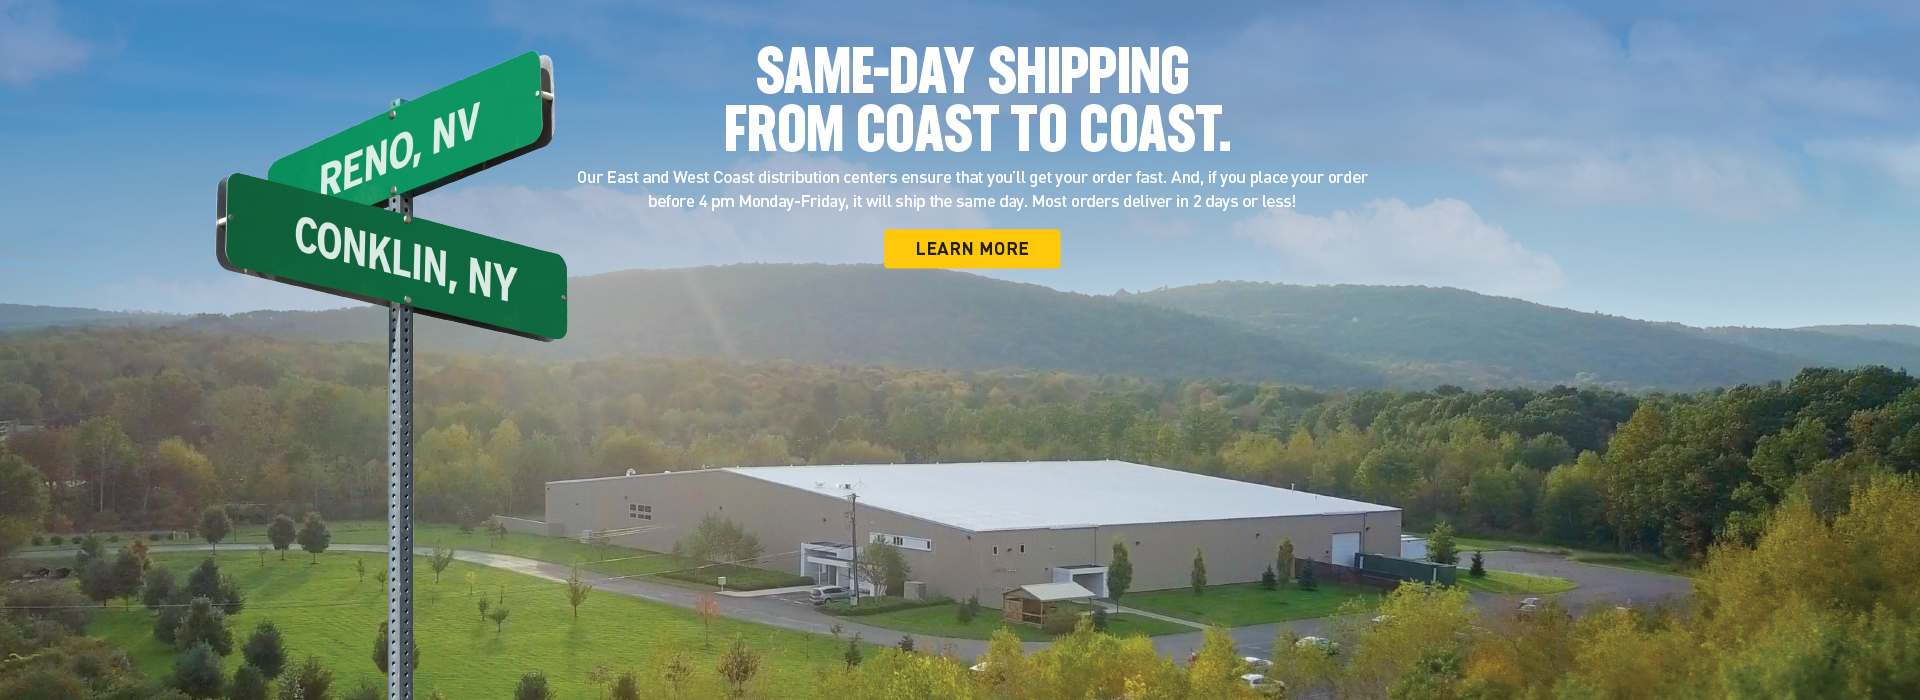 SAME-DAY SHIPPING FROM COAST TO COAST. Our East and West Coast distribution centers ensure that you’ll get your order fast. And, if you place you order before 4 pm Monday-Friday, it will ship the same day. Most orders deliver in 2 days or less!